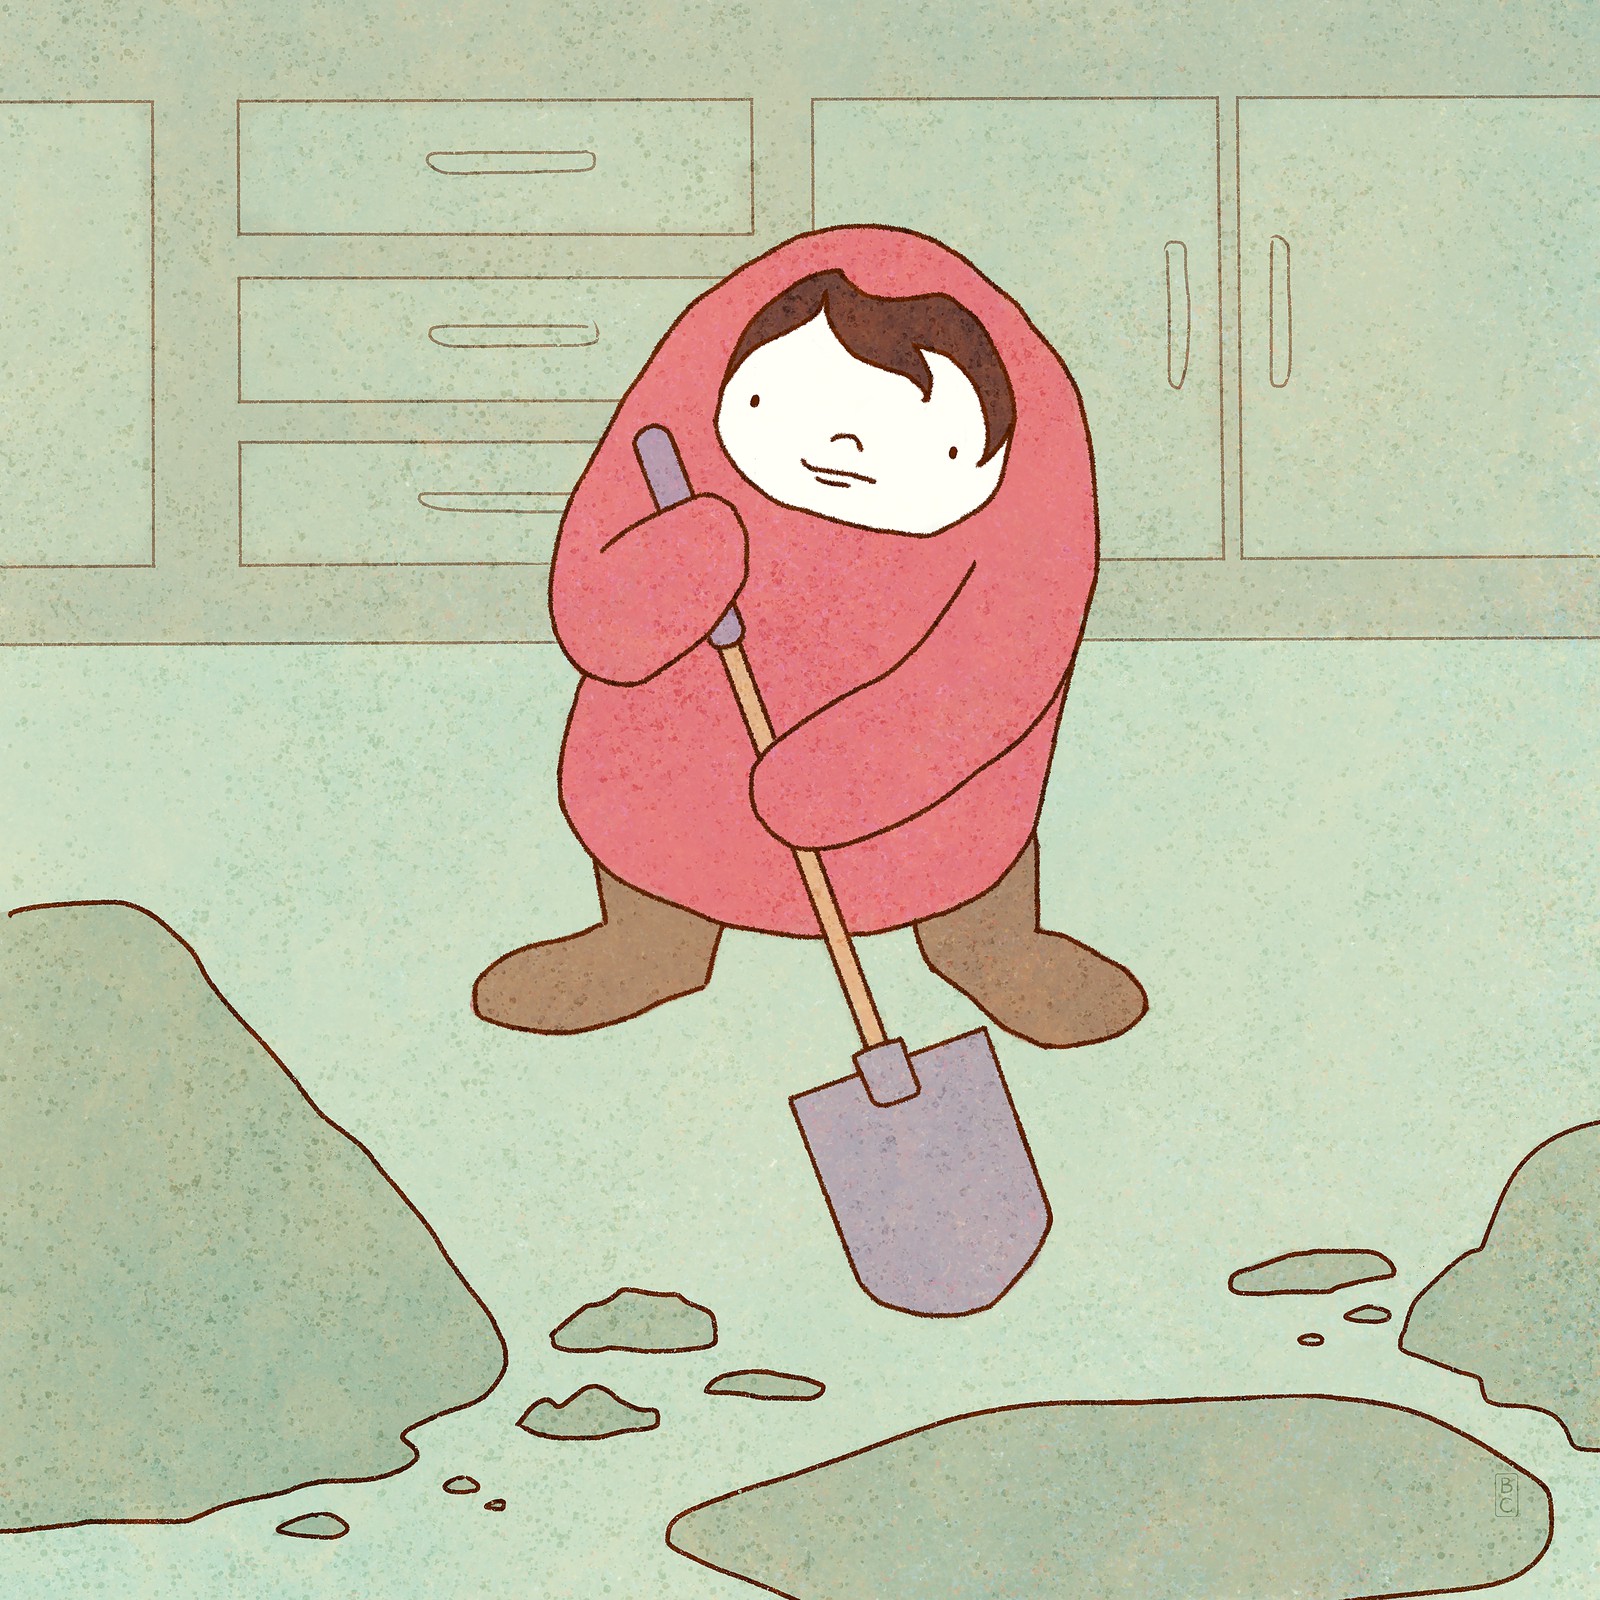 A small child wearing a red snow jacket, digging a hole in a kitchen.